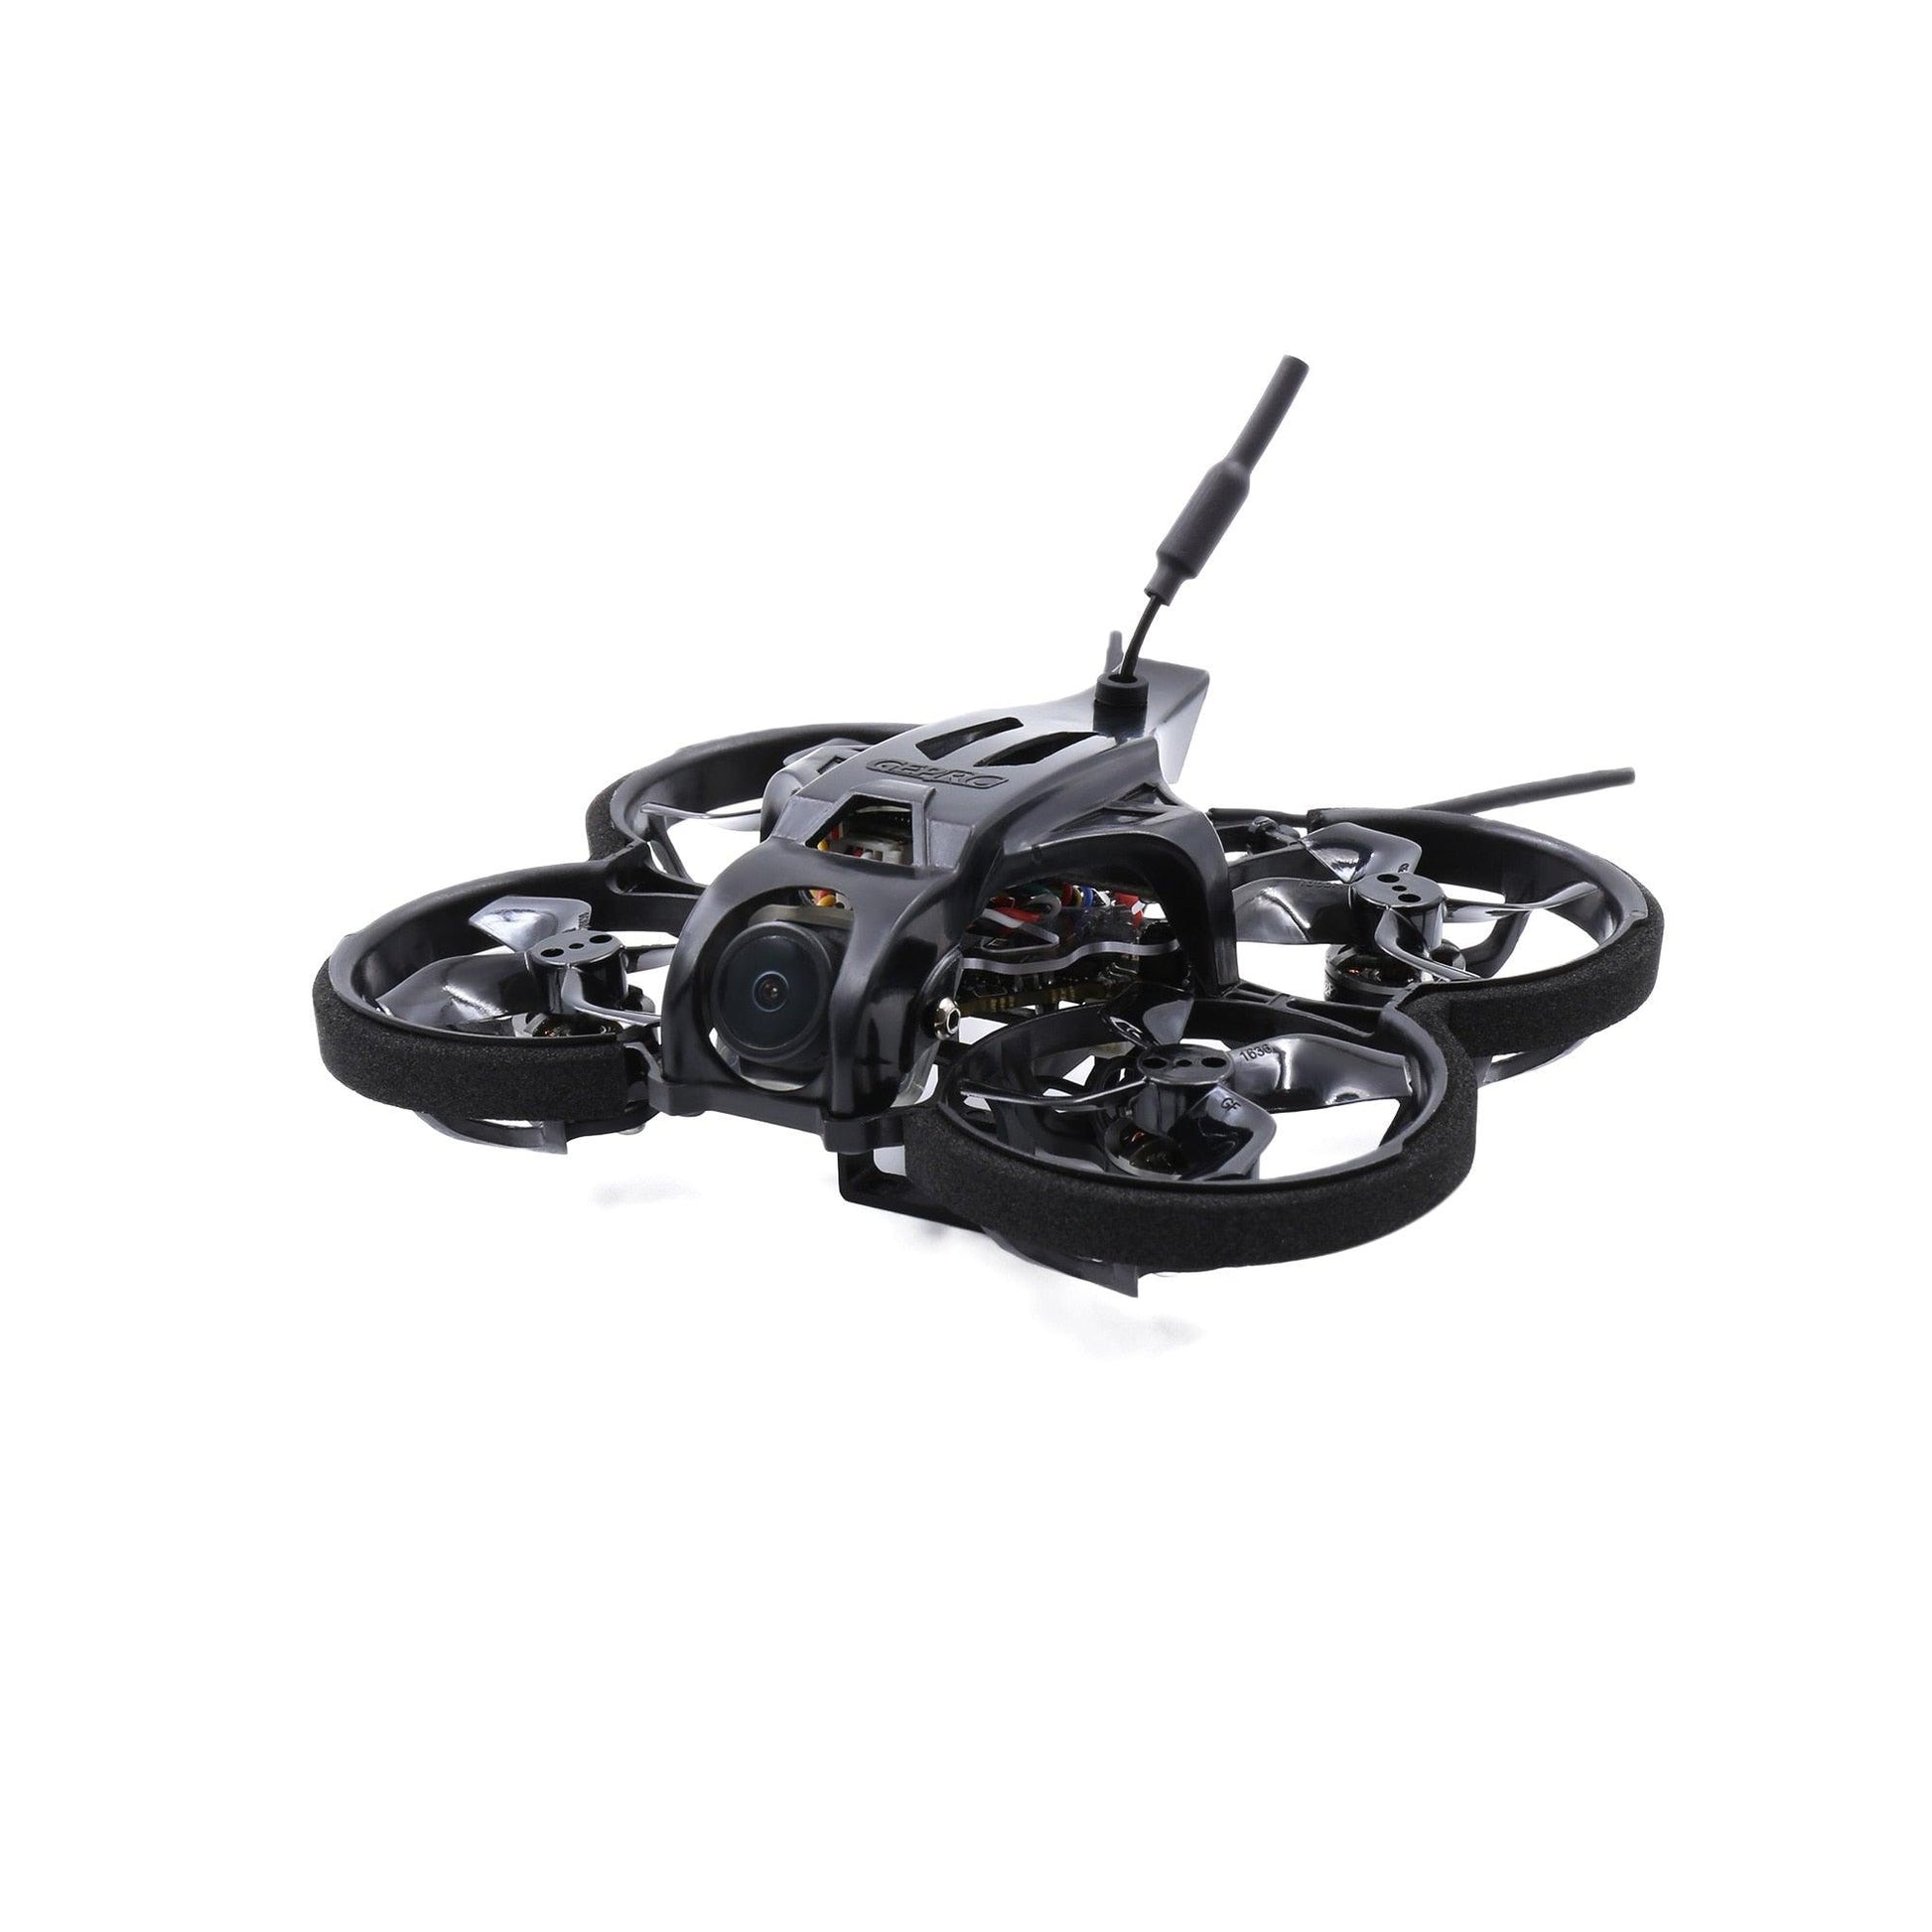 GEPRC TinyGO Racing FPV Whoop RTF Drone - Carbon Fiber Frame For RC FPV Quadcopter Racing Drone Series Very Suitable For Beginners - RCDrone